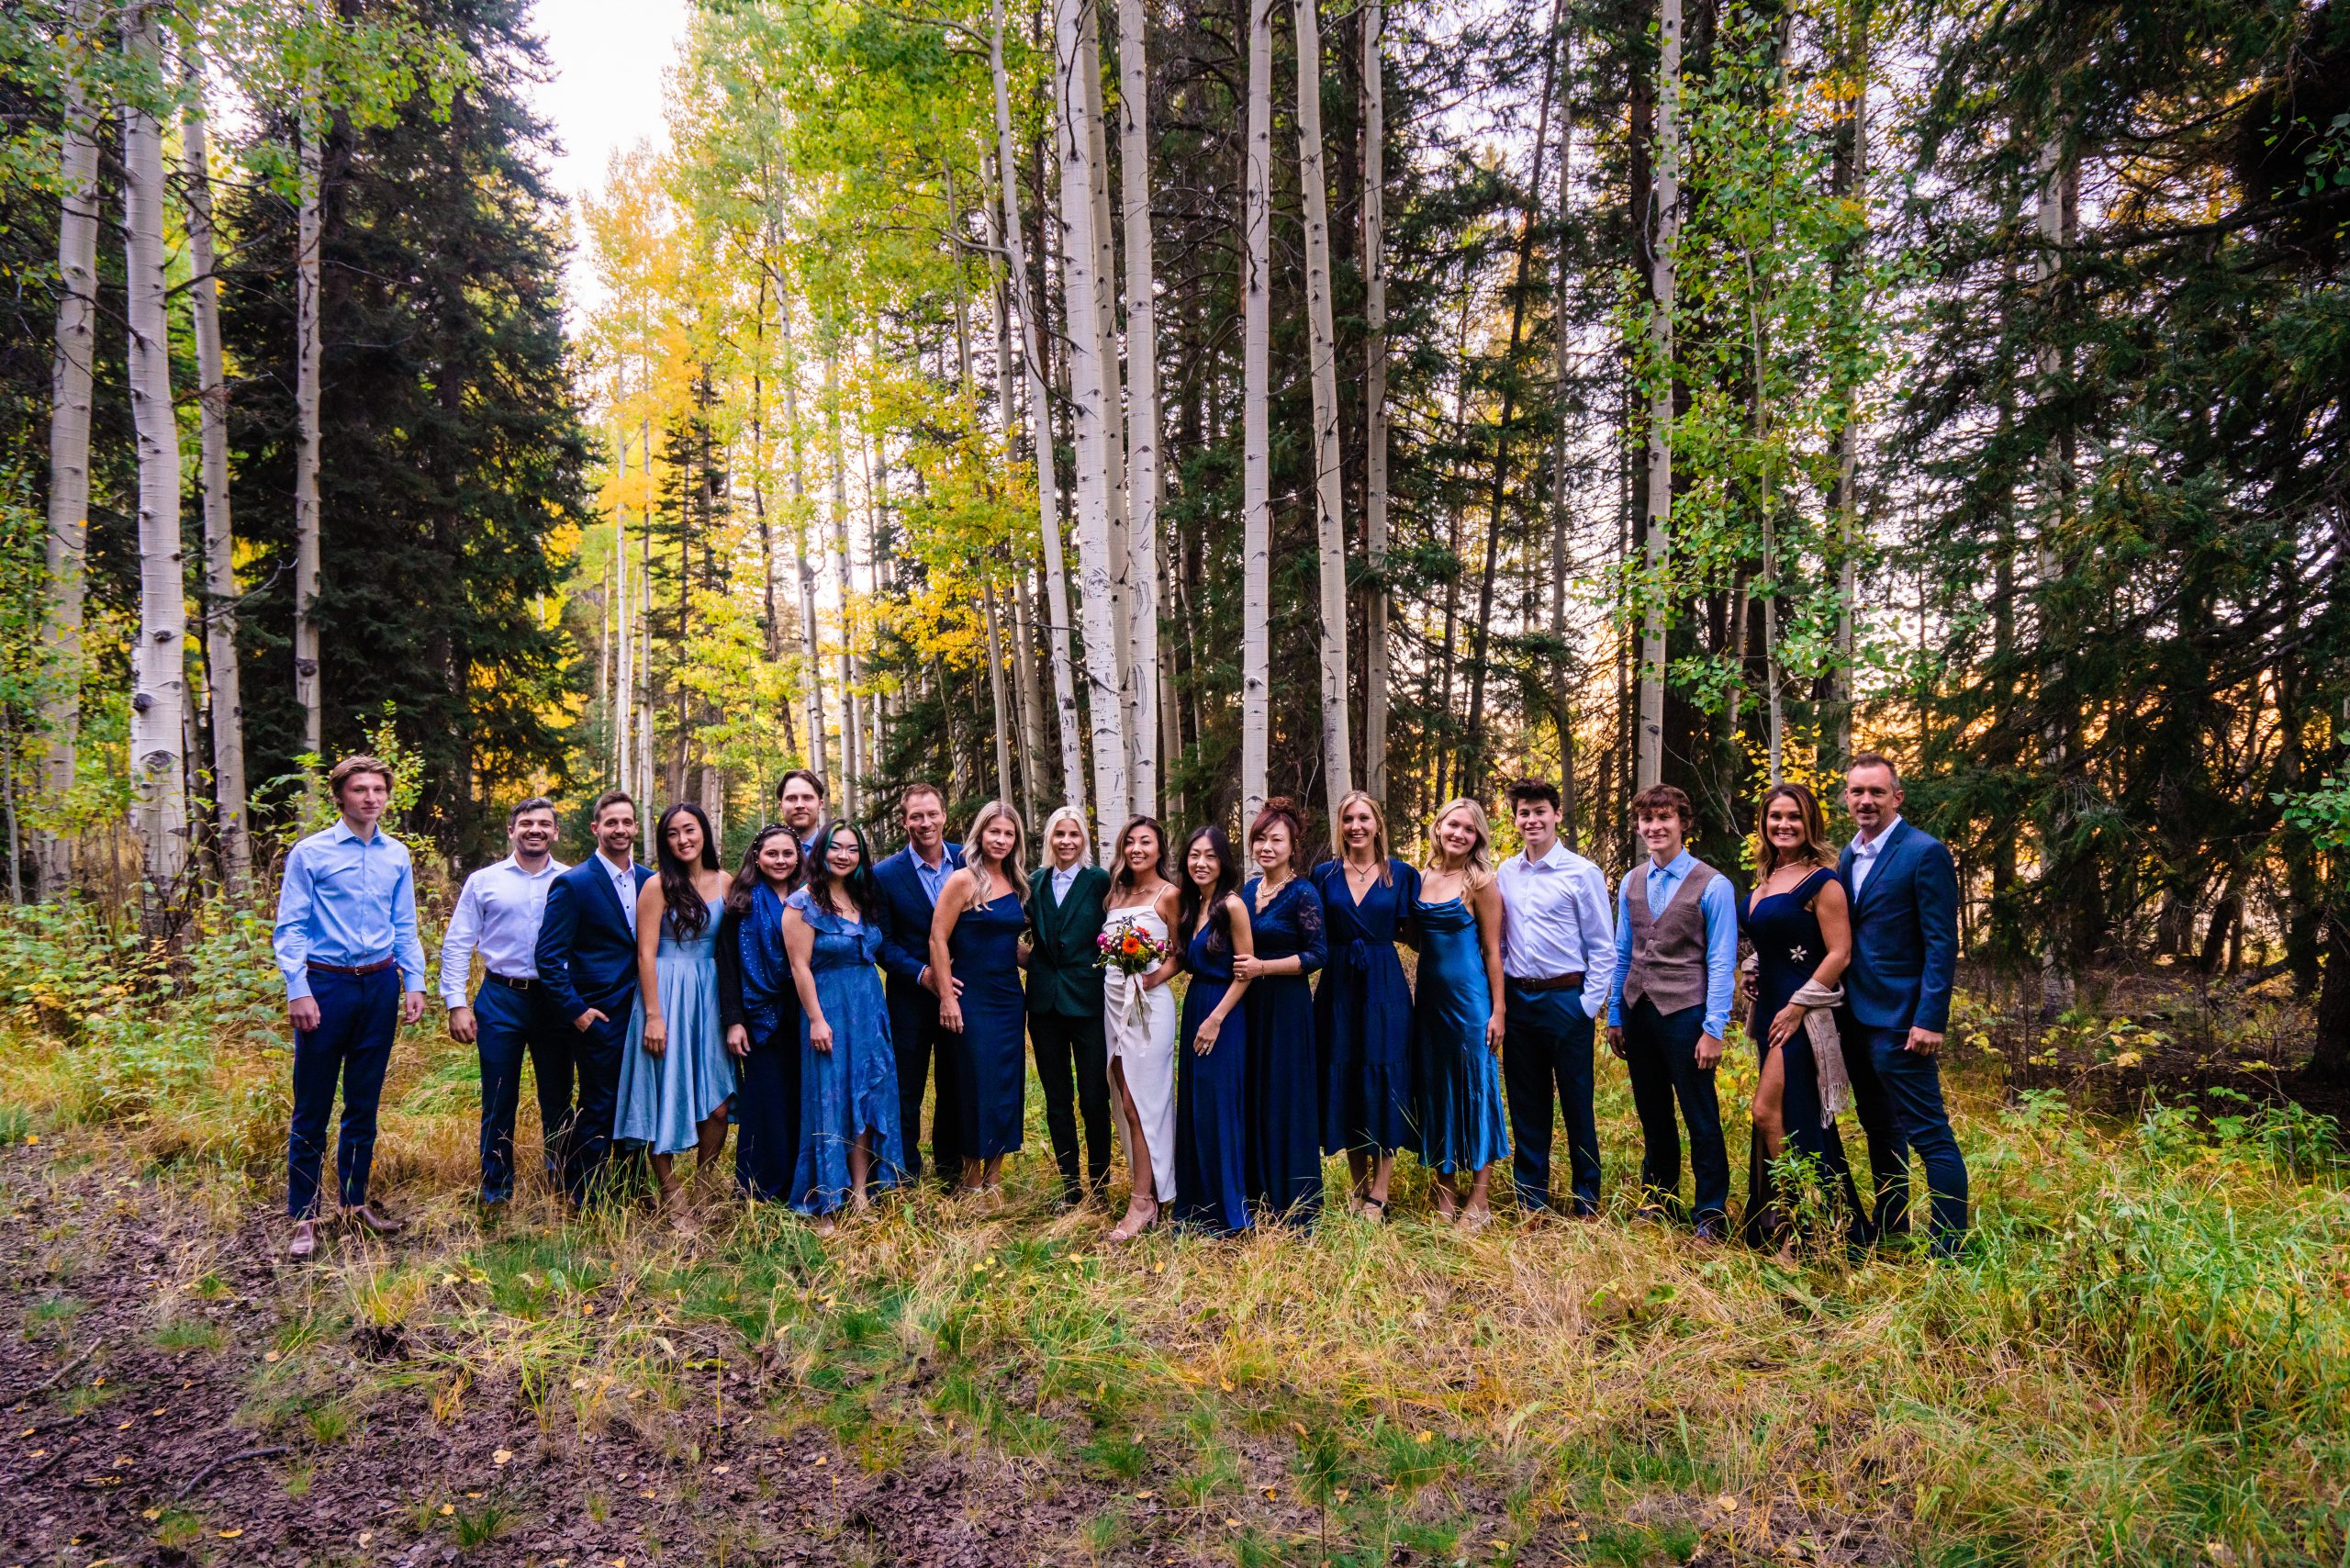 A beautiful lesbian elopement day at Crested Butte in Colorado with family and friends